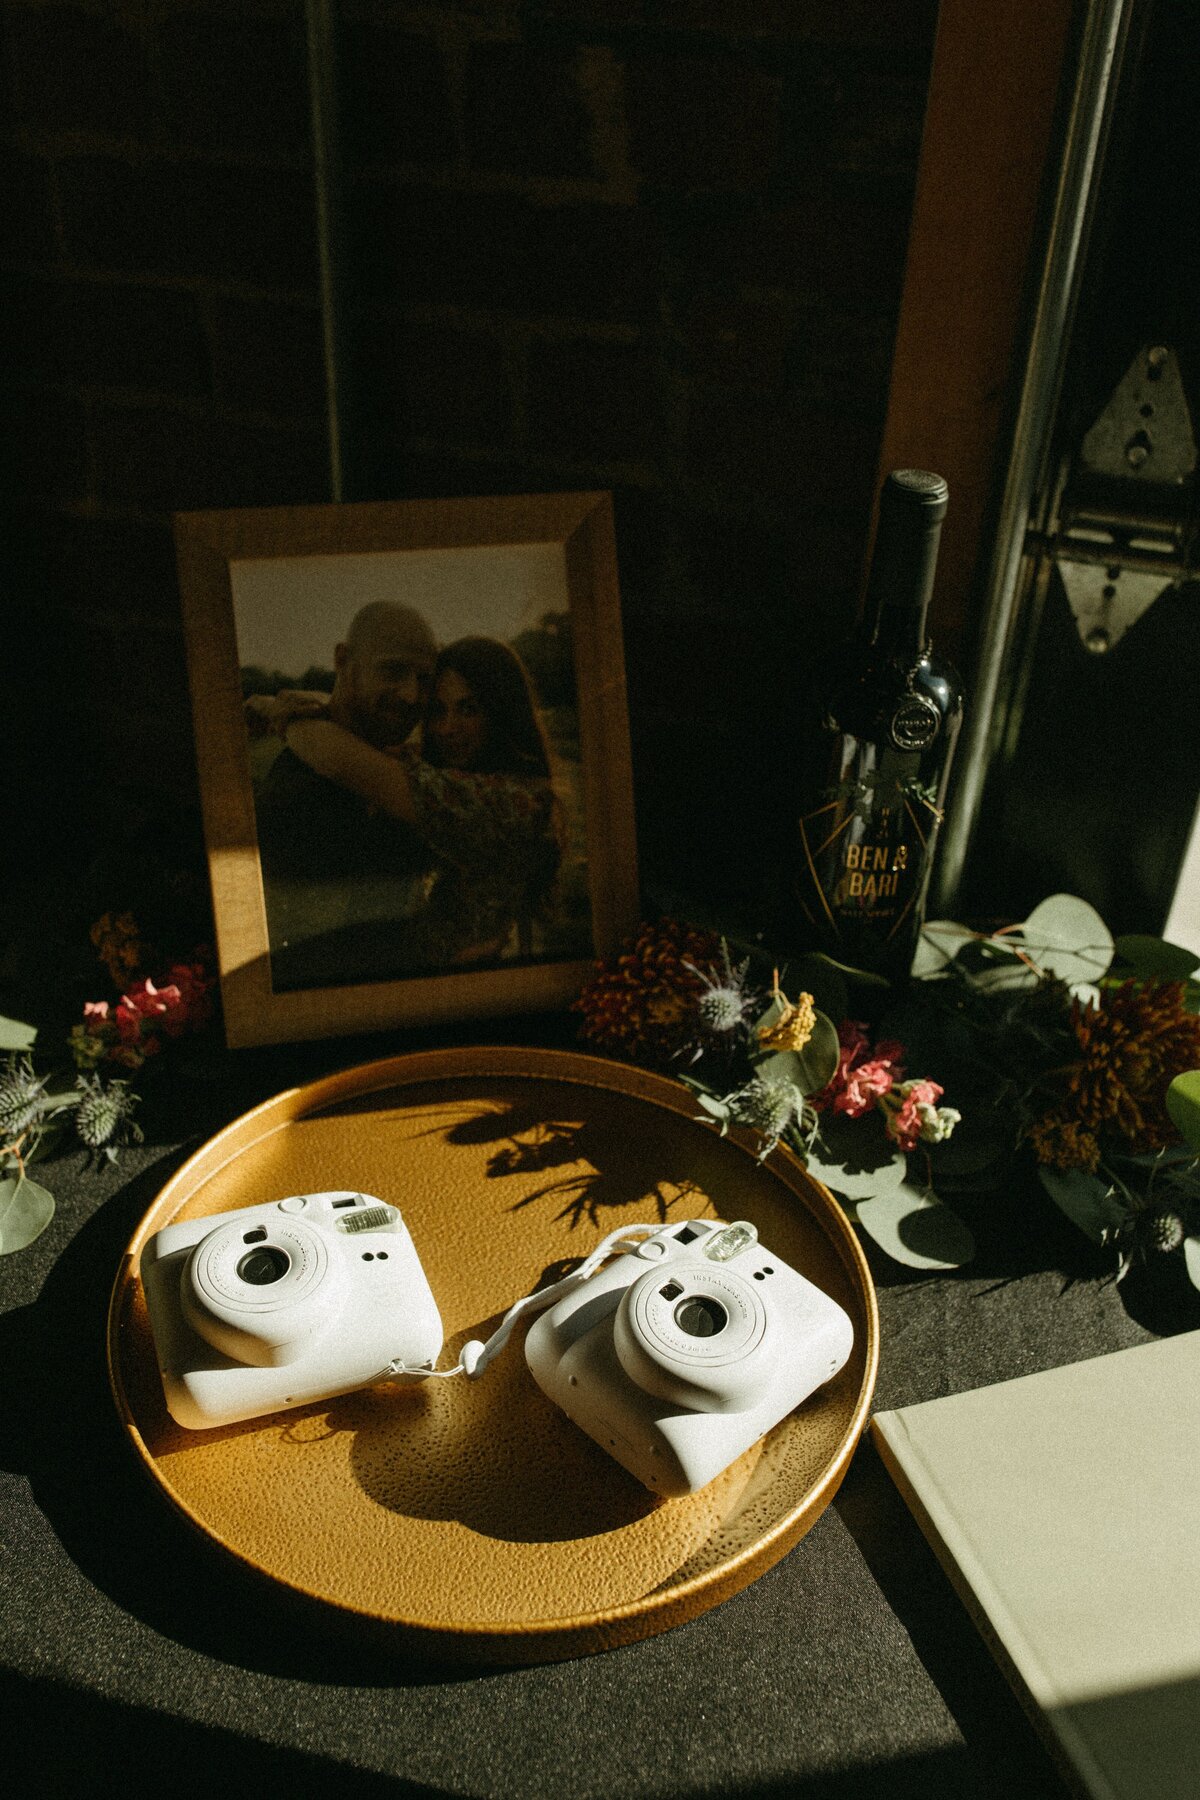 A framed couple's portrait next to two white instant cameras on a tray, with a bottle and floral decorations around, all under natural light at a Park Farm Winery wedding.